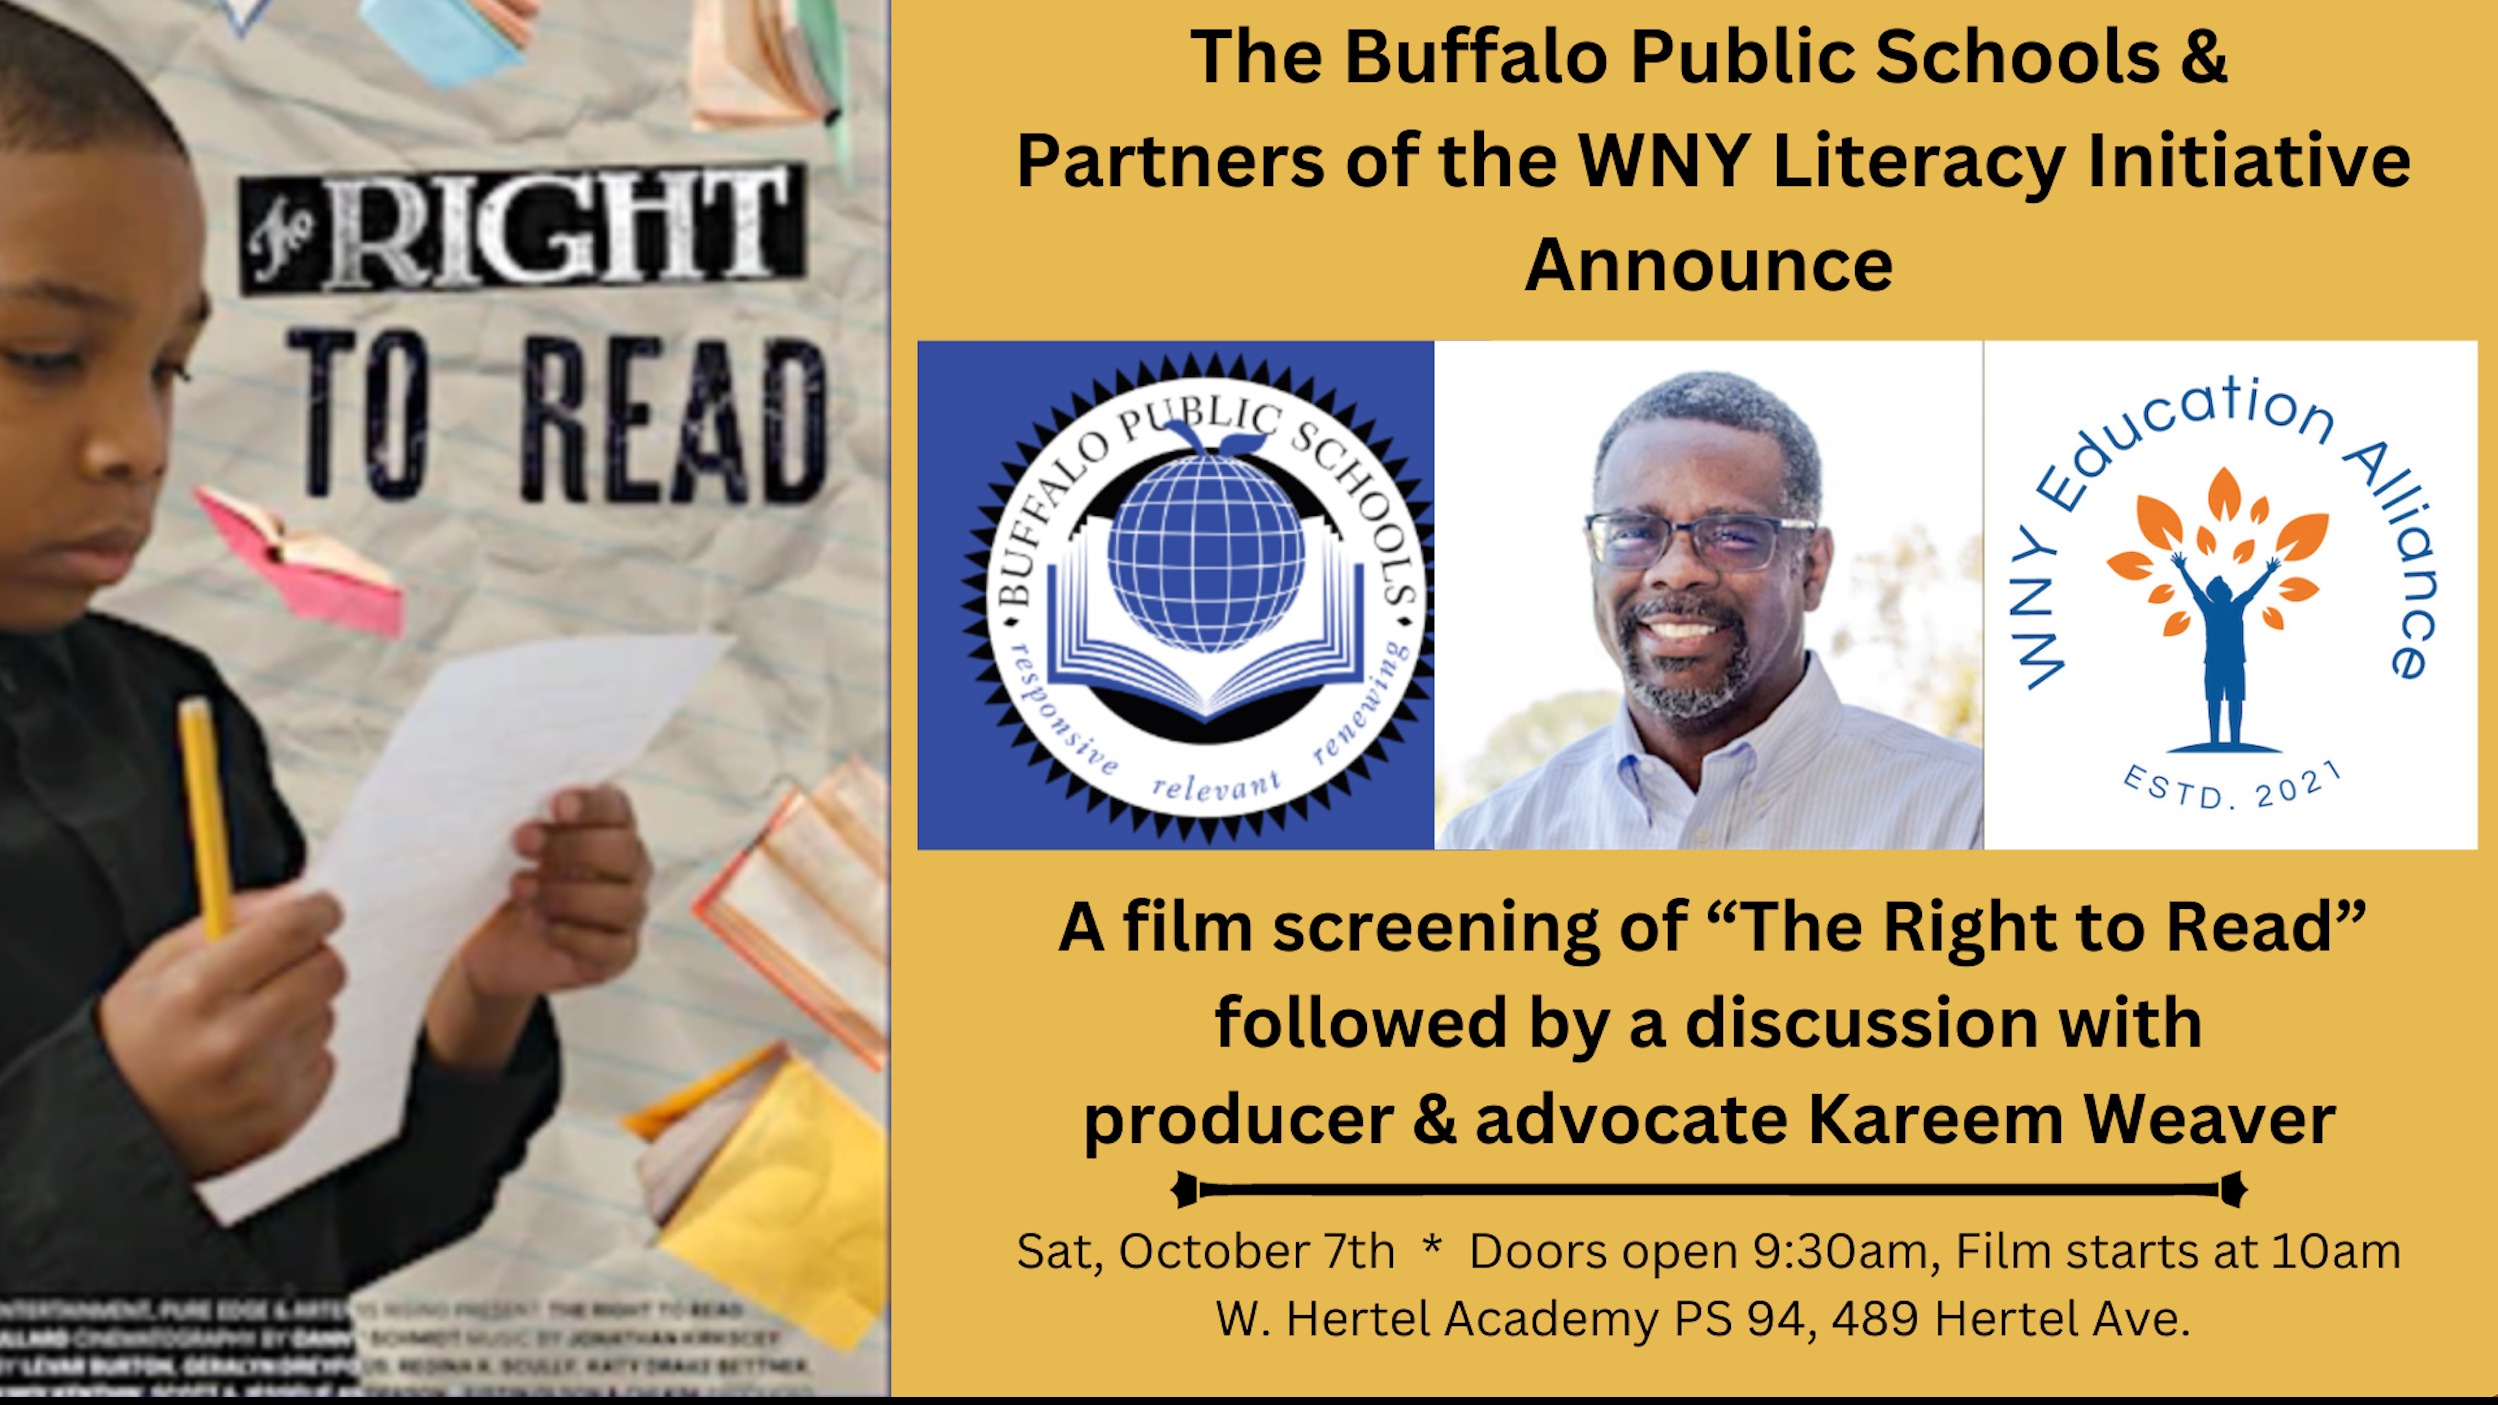 Buffalo Public Schools District-Wide Screening of "The Right to Read" & Discussion with Kareem Weaver! Image